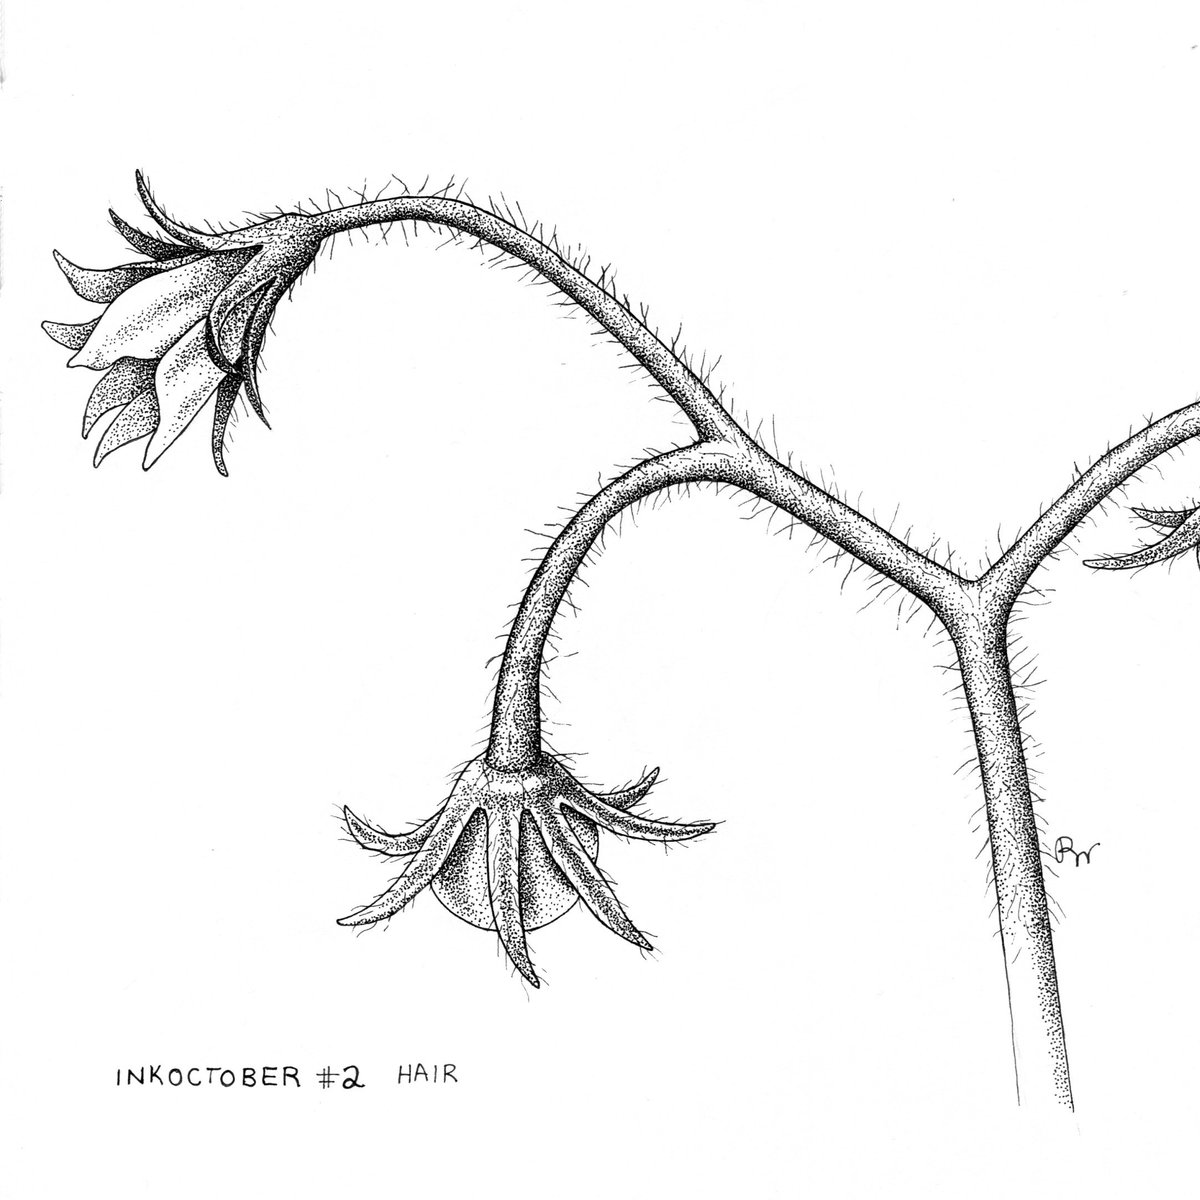 Ink October #2 'Hair' 

Tomato plant hairs called Trichomes

 #sciartink #sciartnow #penandink #sciart #illustration #scientificillustration #medicalillustrator #scientificillustrator #freelanceillustrator #inkoctober #naturalhistoryillustration